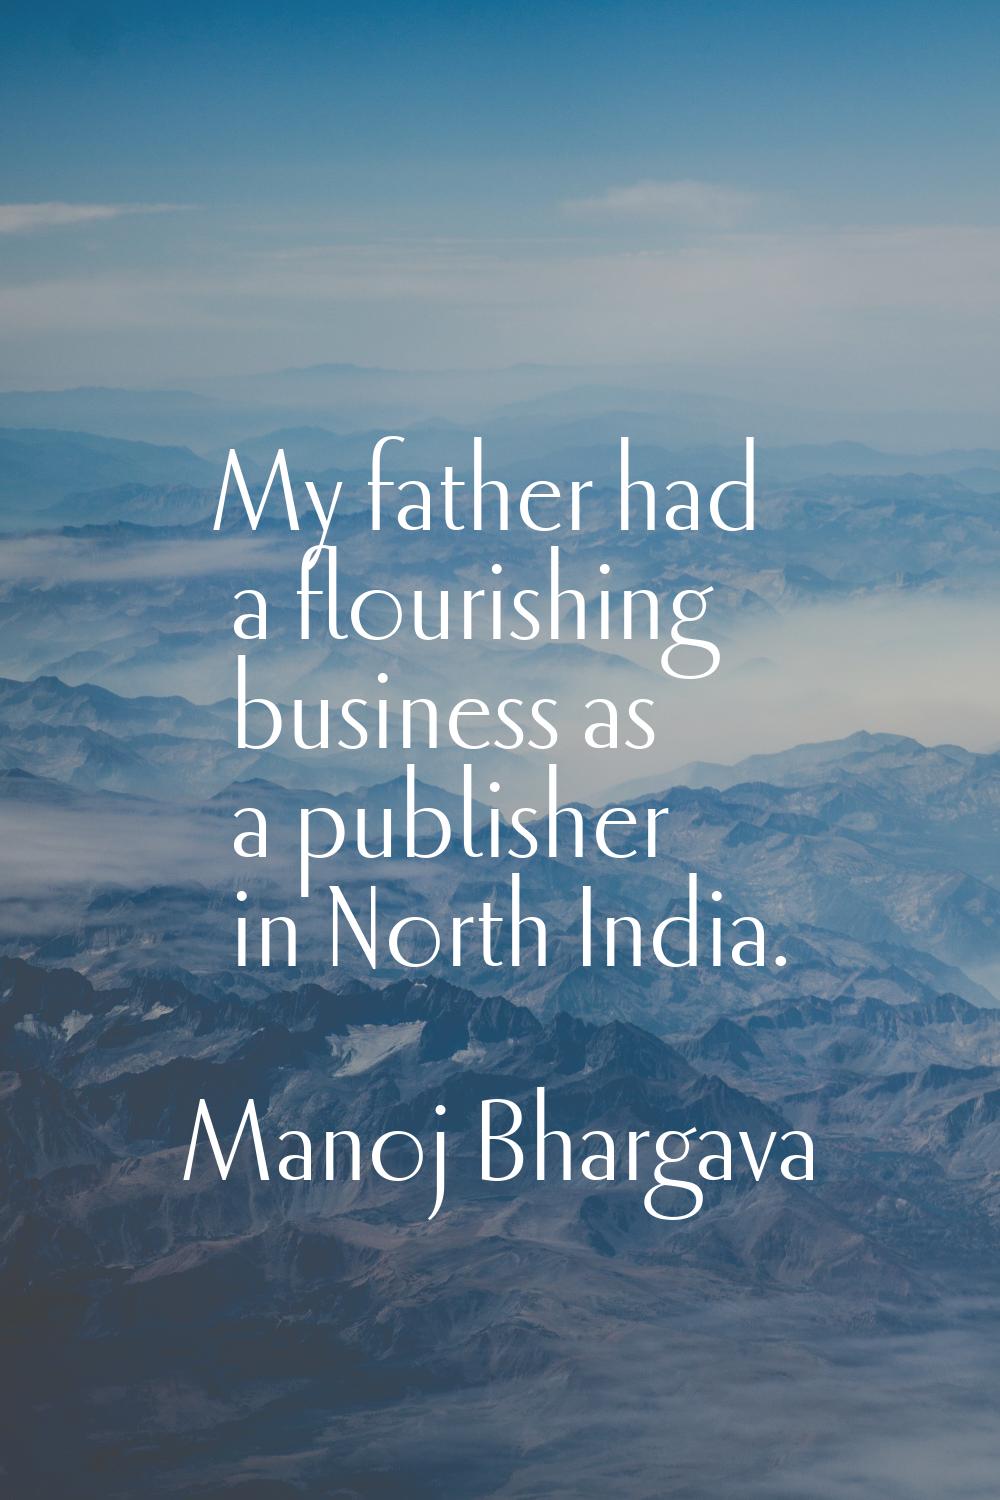 My father had a flourishing business as a publisher in North India.